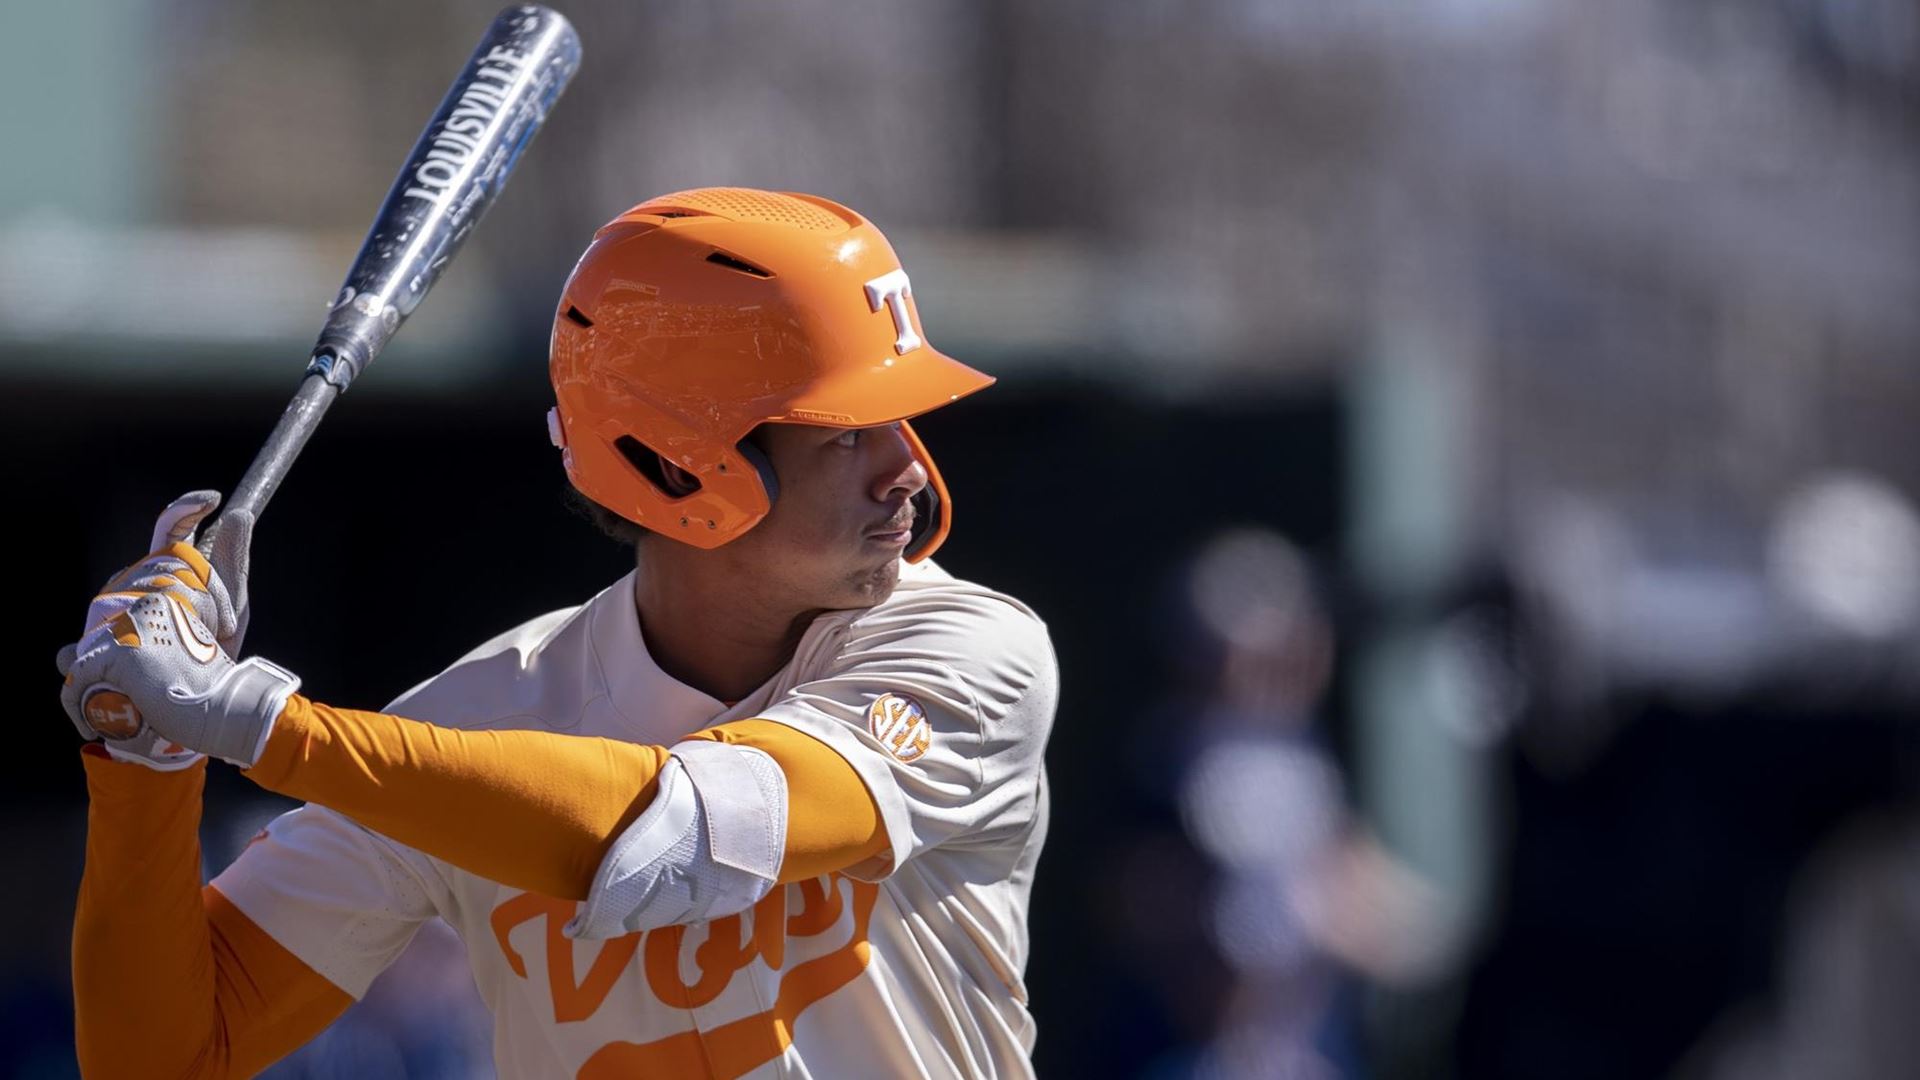 A THIRD 3-RUN HOMER FOR THE VOLS AND - Tennessee Baseball